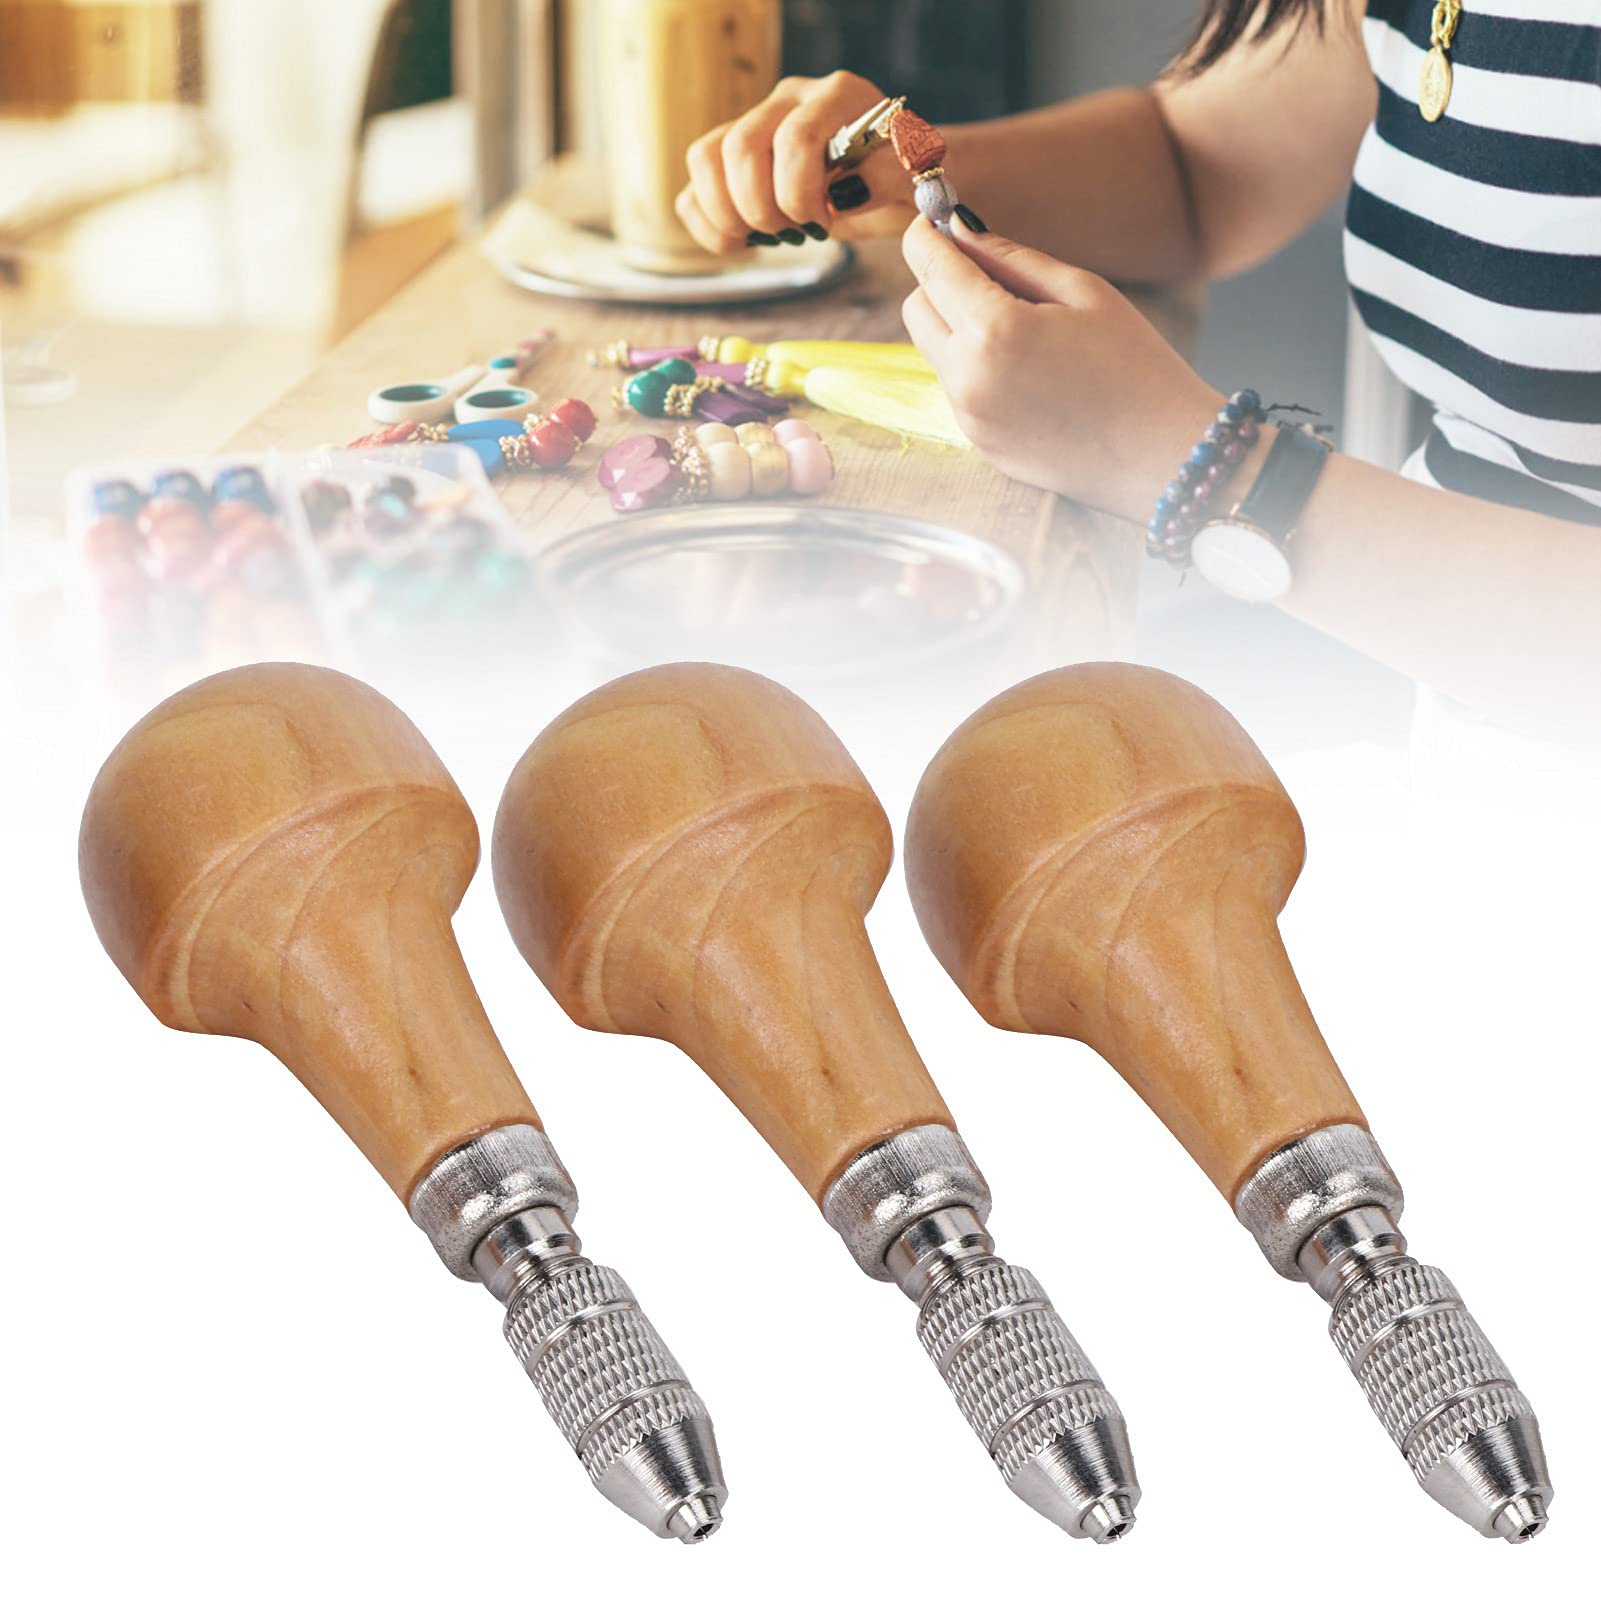 3 Set Hand Chucks Jewelry Making Pin Vise Wooden Handles Pear Shape Graver Handle Pin Vise Hand Drill Wooden Handle for Stone Setting Graver Replacement